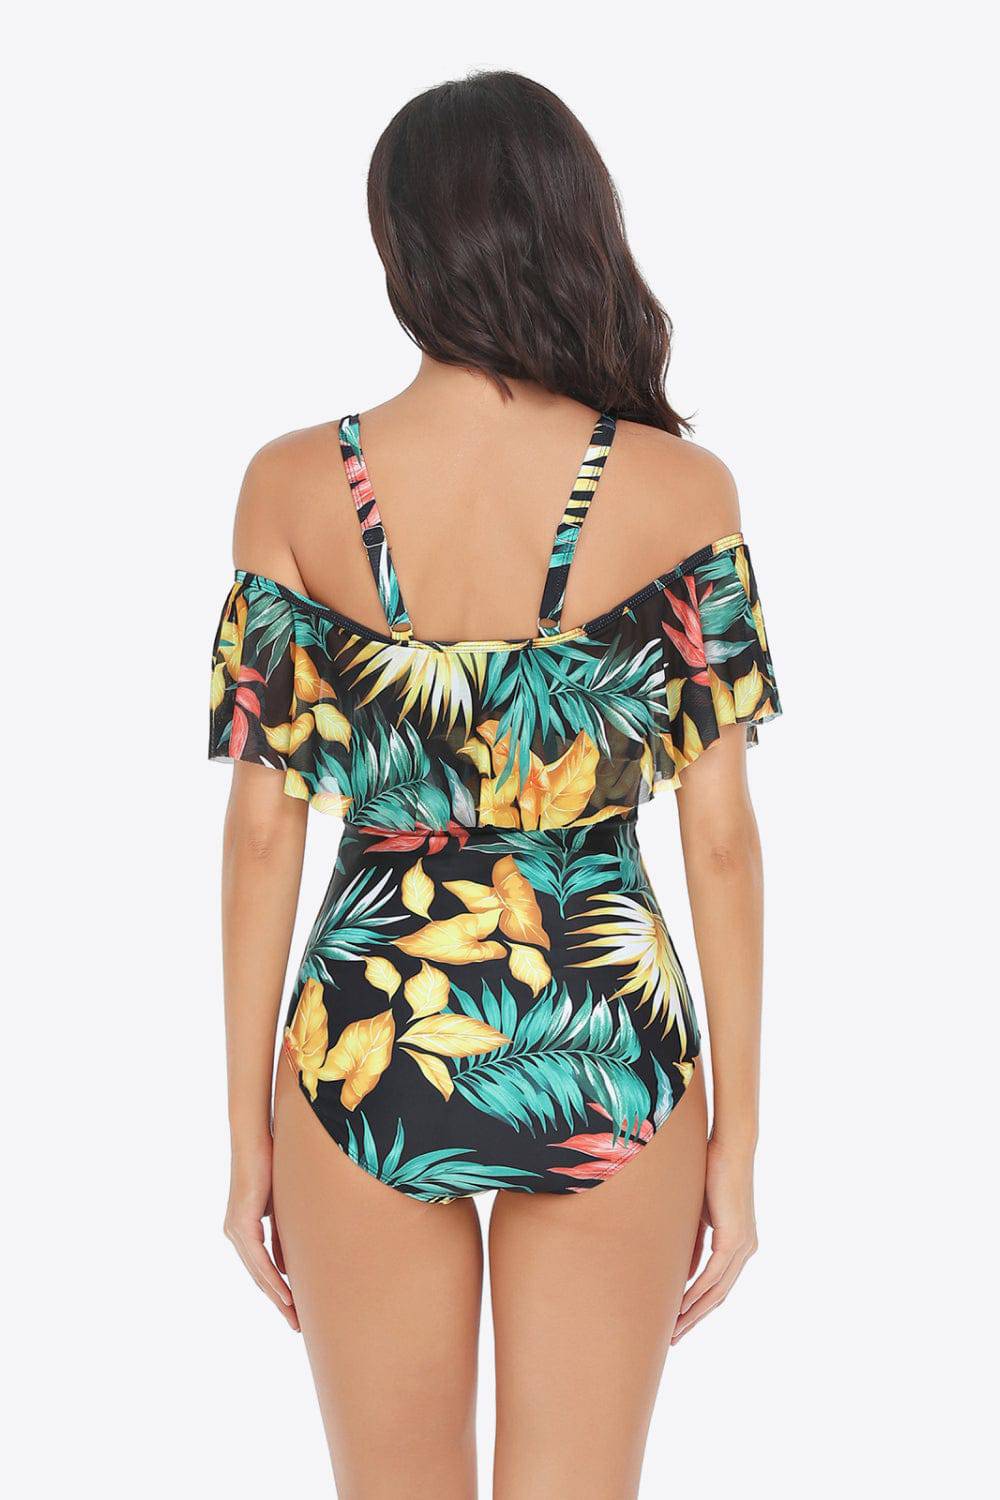 Goddess of Blooms - Unleash your Feminine Charm with our Botanical Print Cold-Shoulder Layered Swimsuit - Indulge in Elegance and Comfort. - Guy Christopher